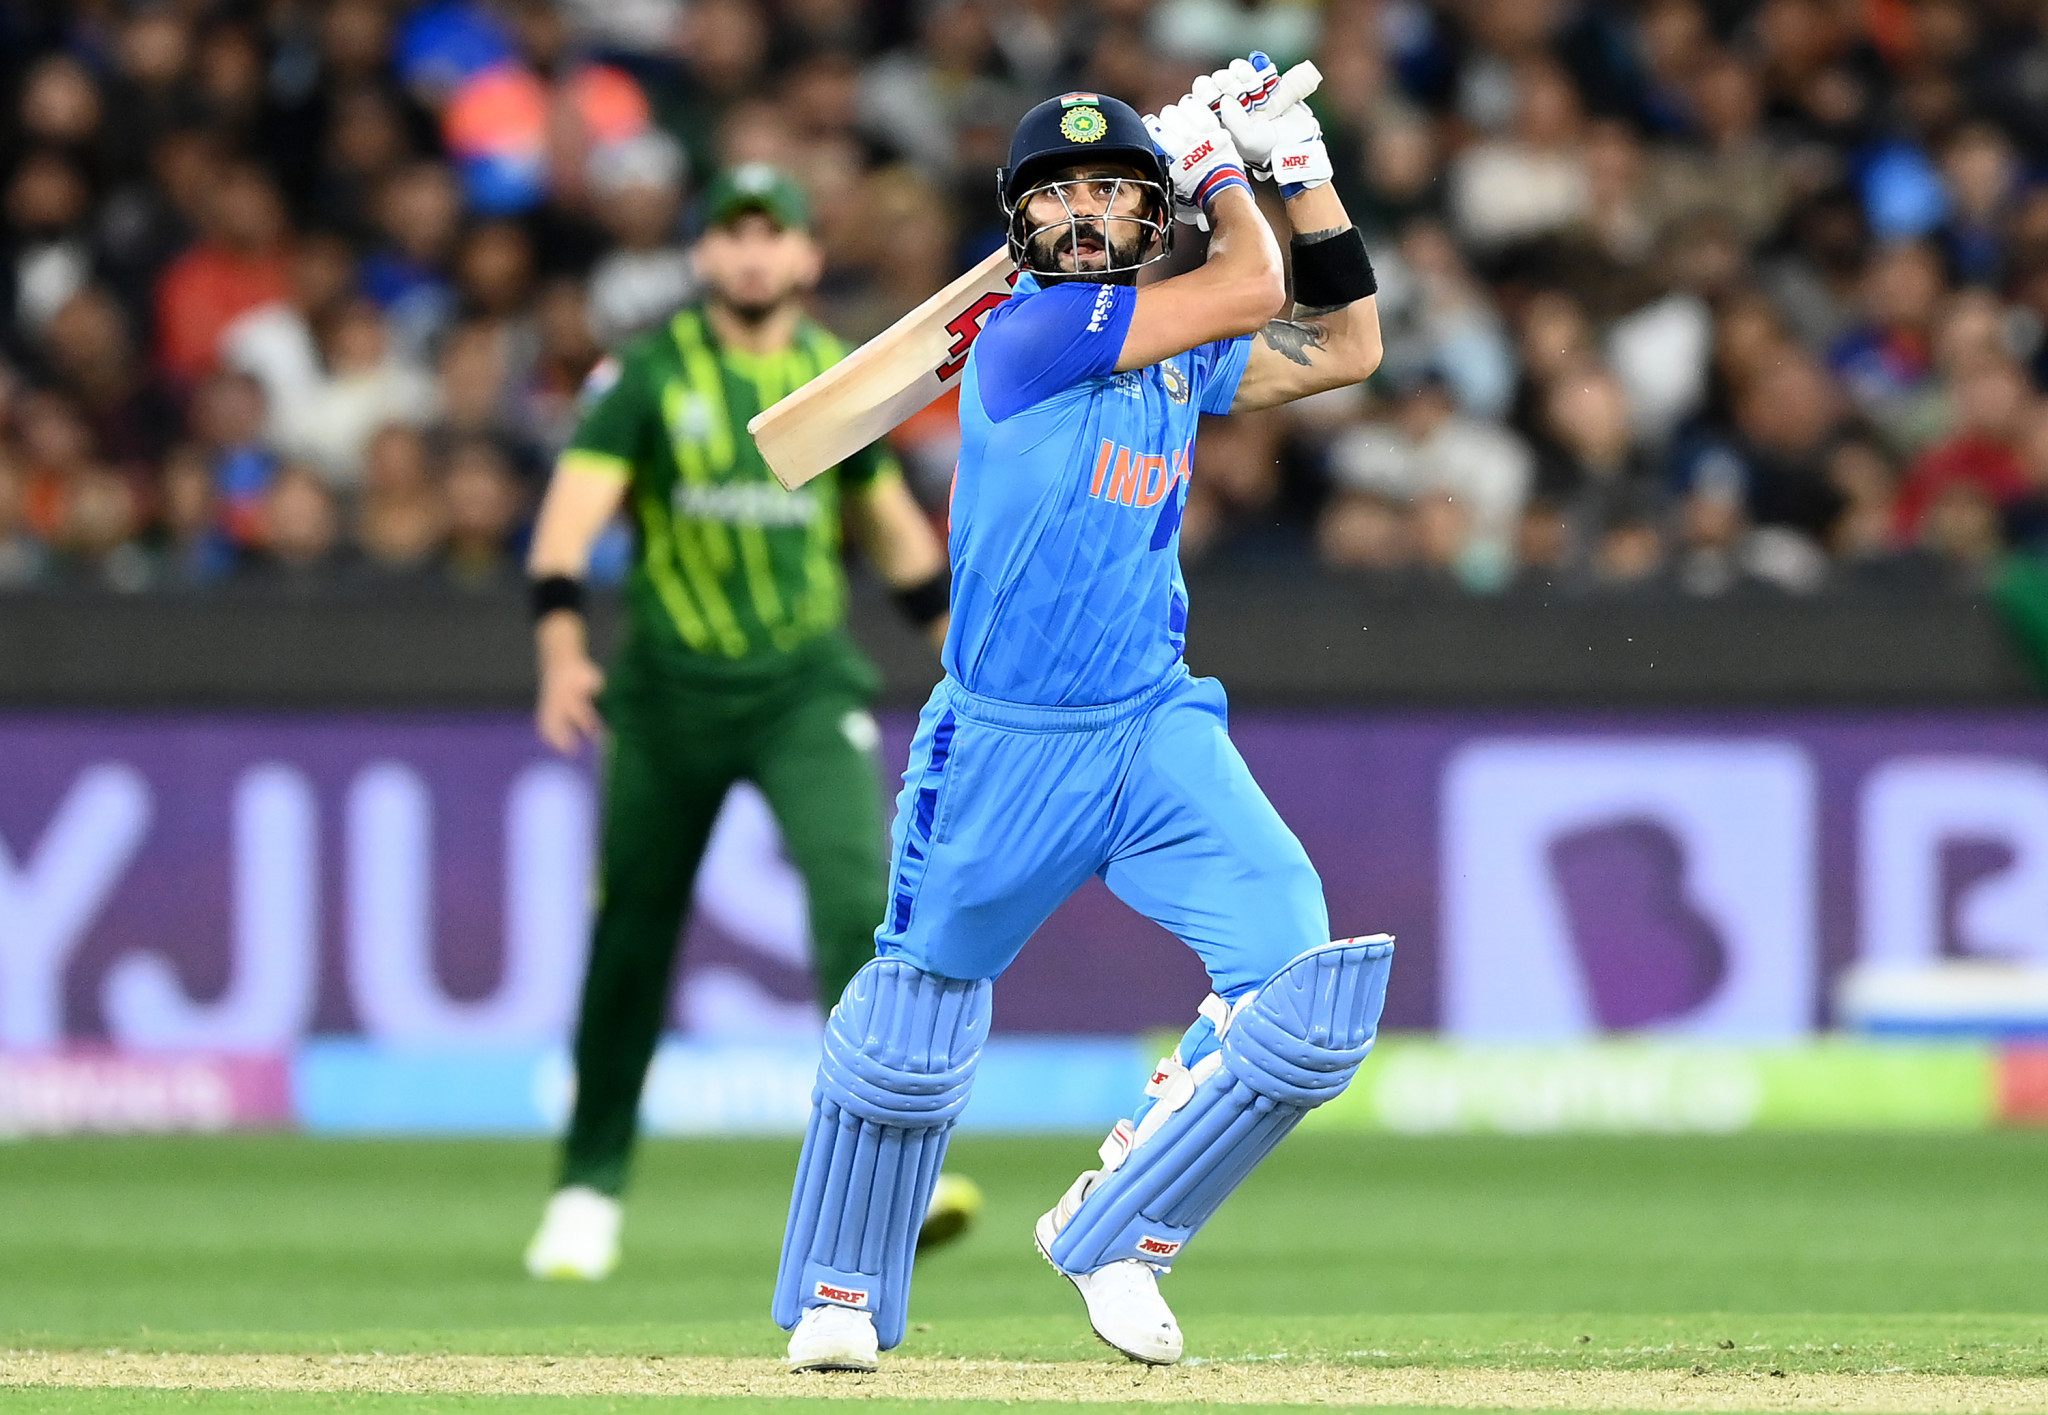 Virat Kohli played one of the great T20 innings versus Pakistan ©Getty Images